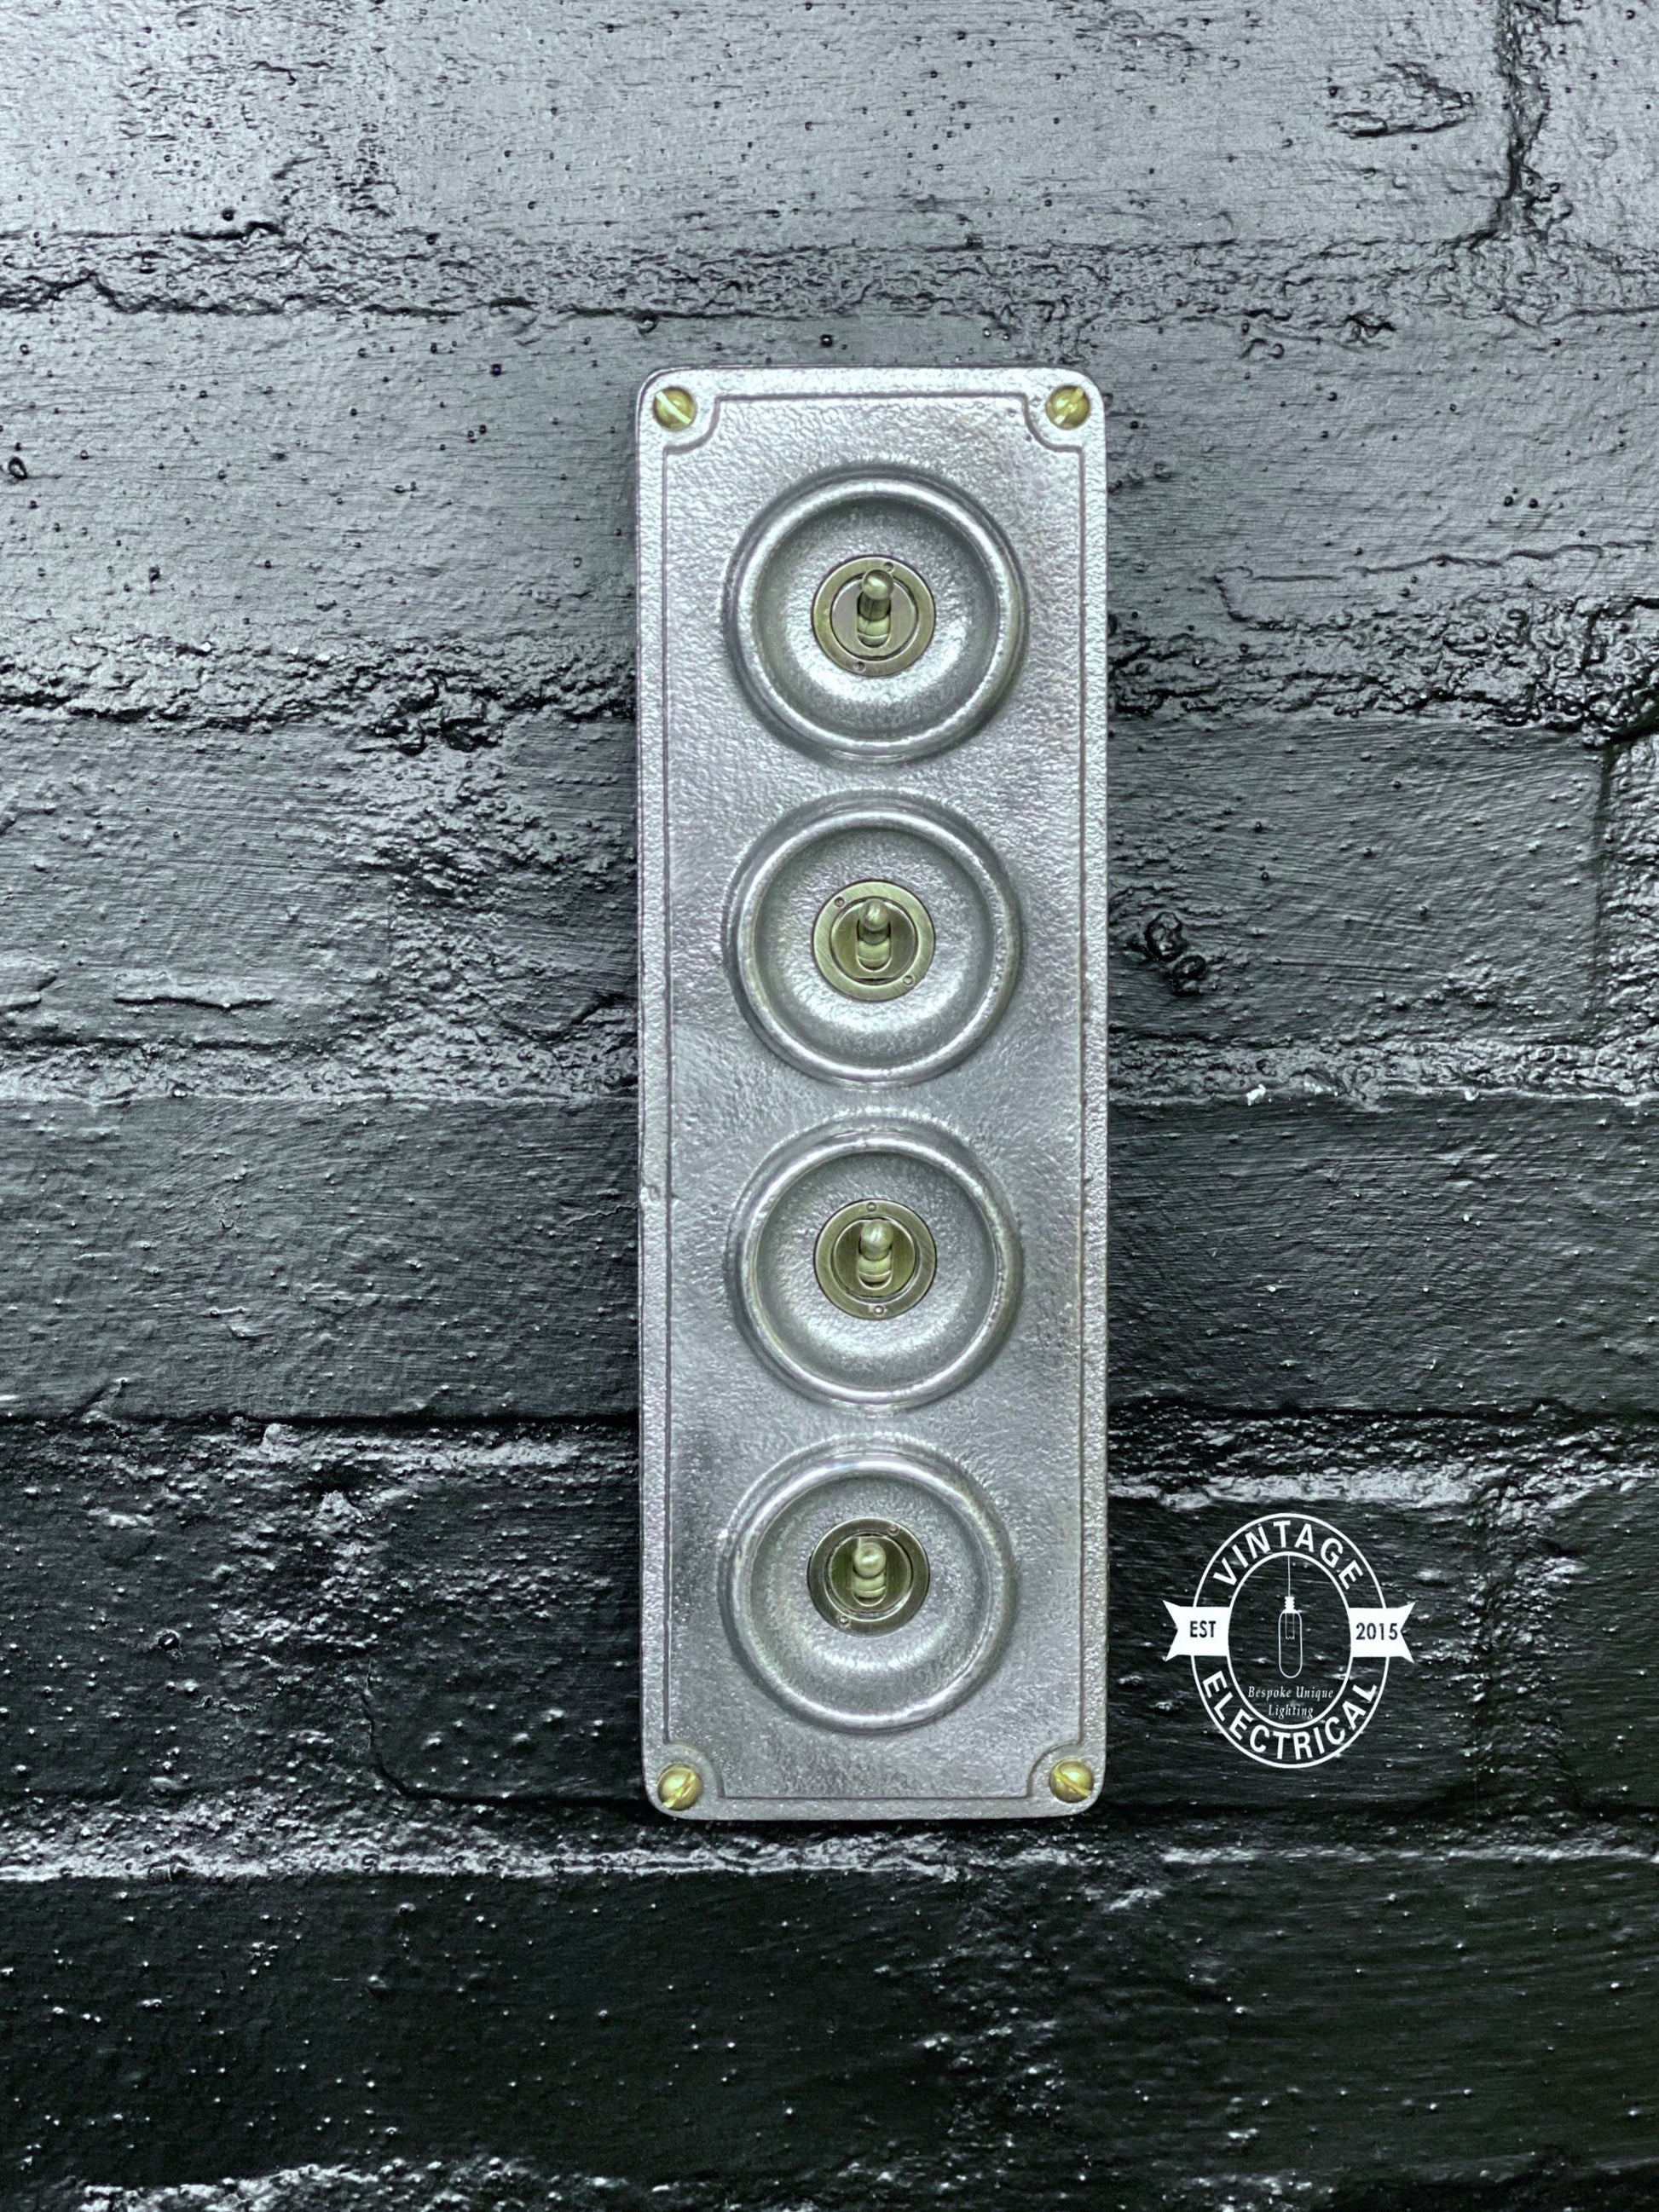 4 Gang 2 Way Solid Cast Metal Light Switch Industrial - BS EN Approved Vintage Crabtree 1950’s Style